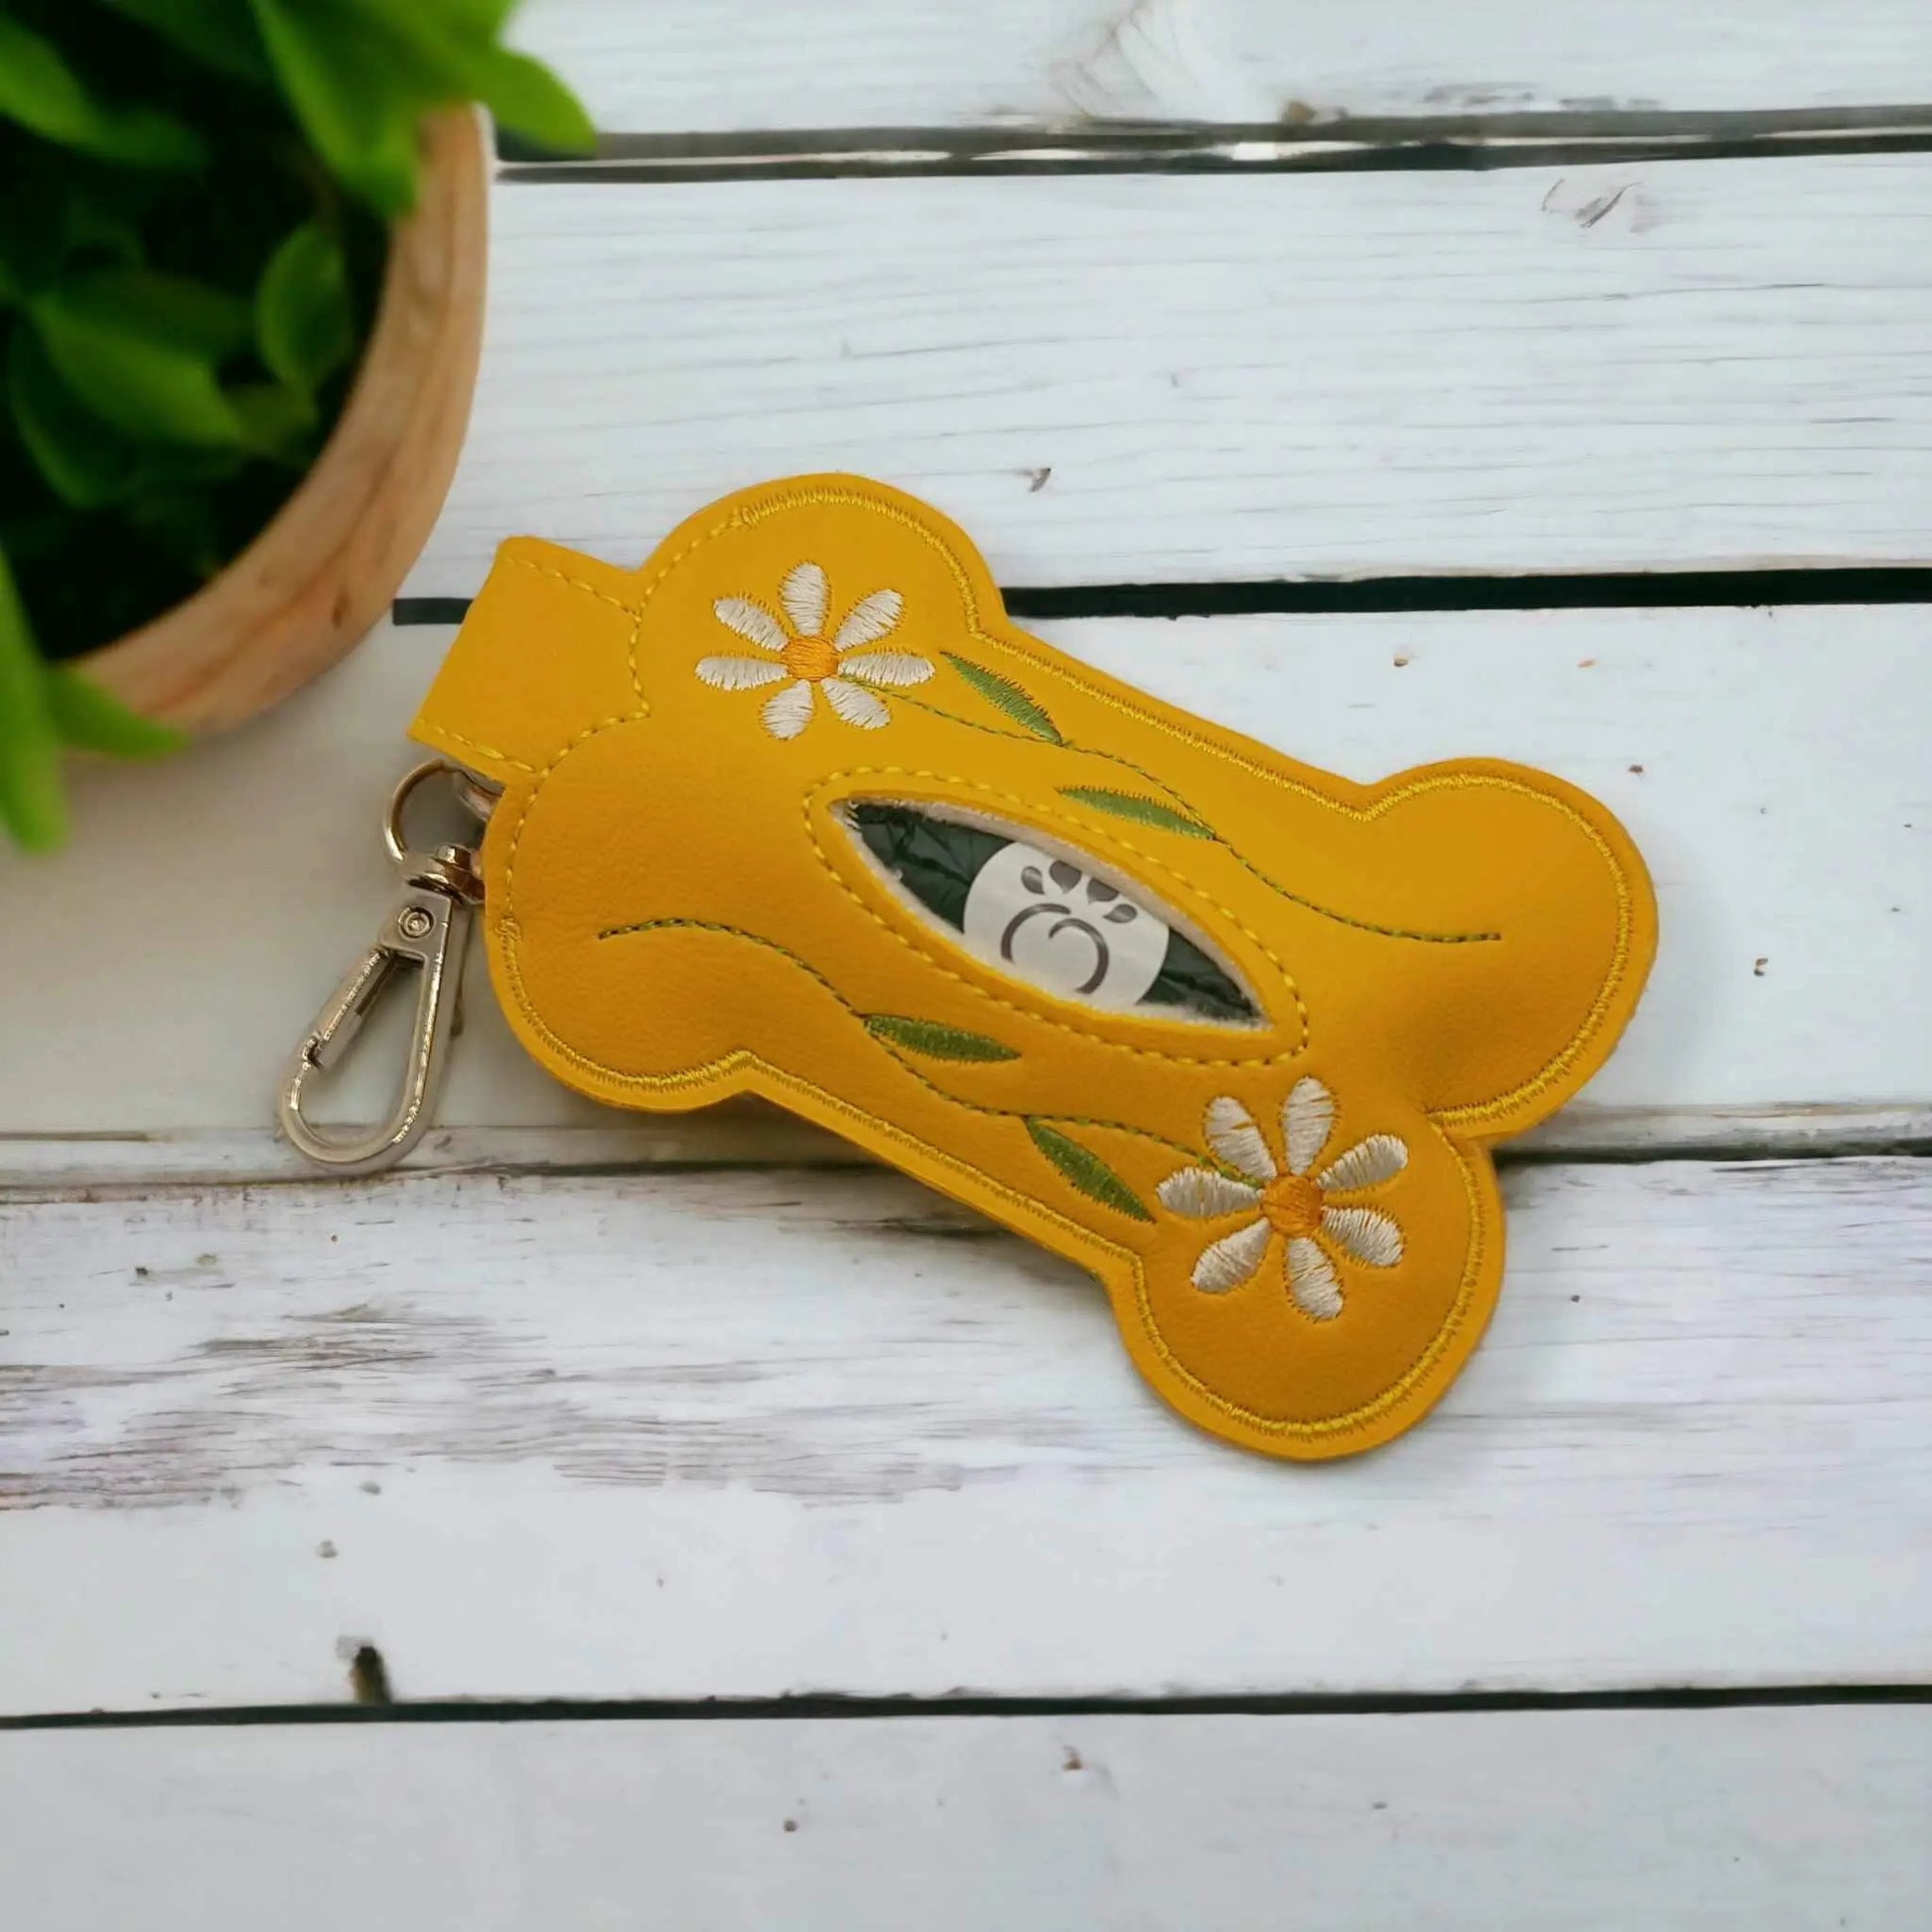 Dog Poop Bag Keychain Holder | Bag Dispenser | The Perfect Accessory for All Dog Owners | Made in Australia